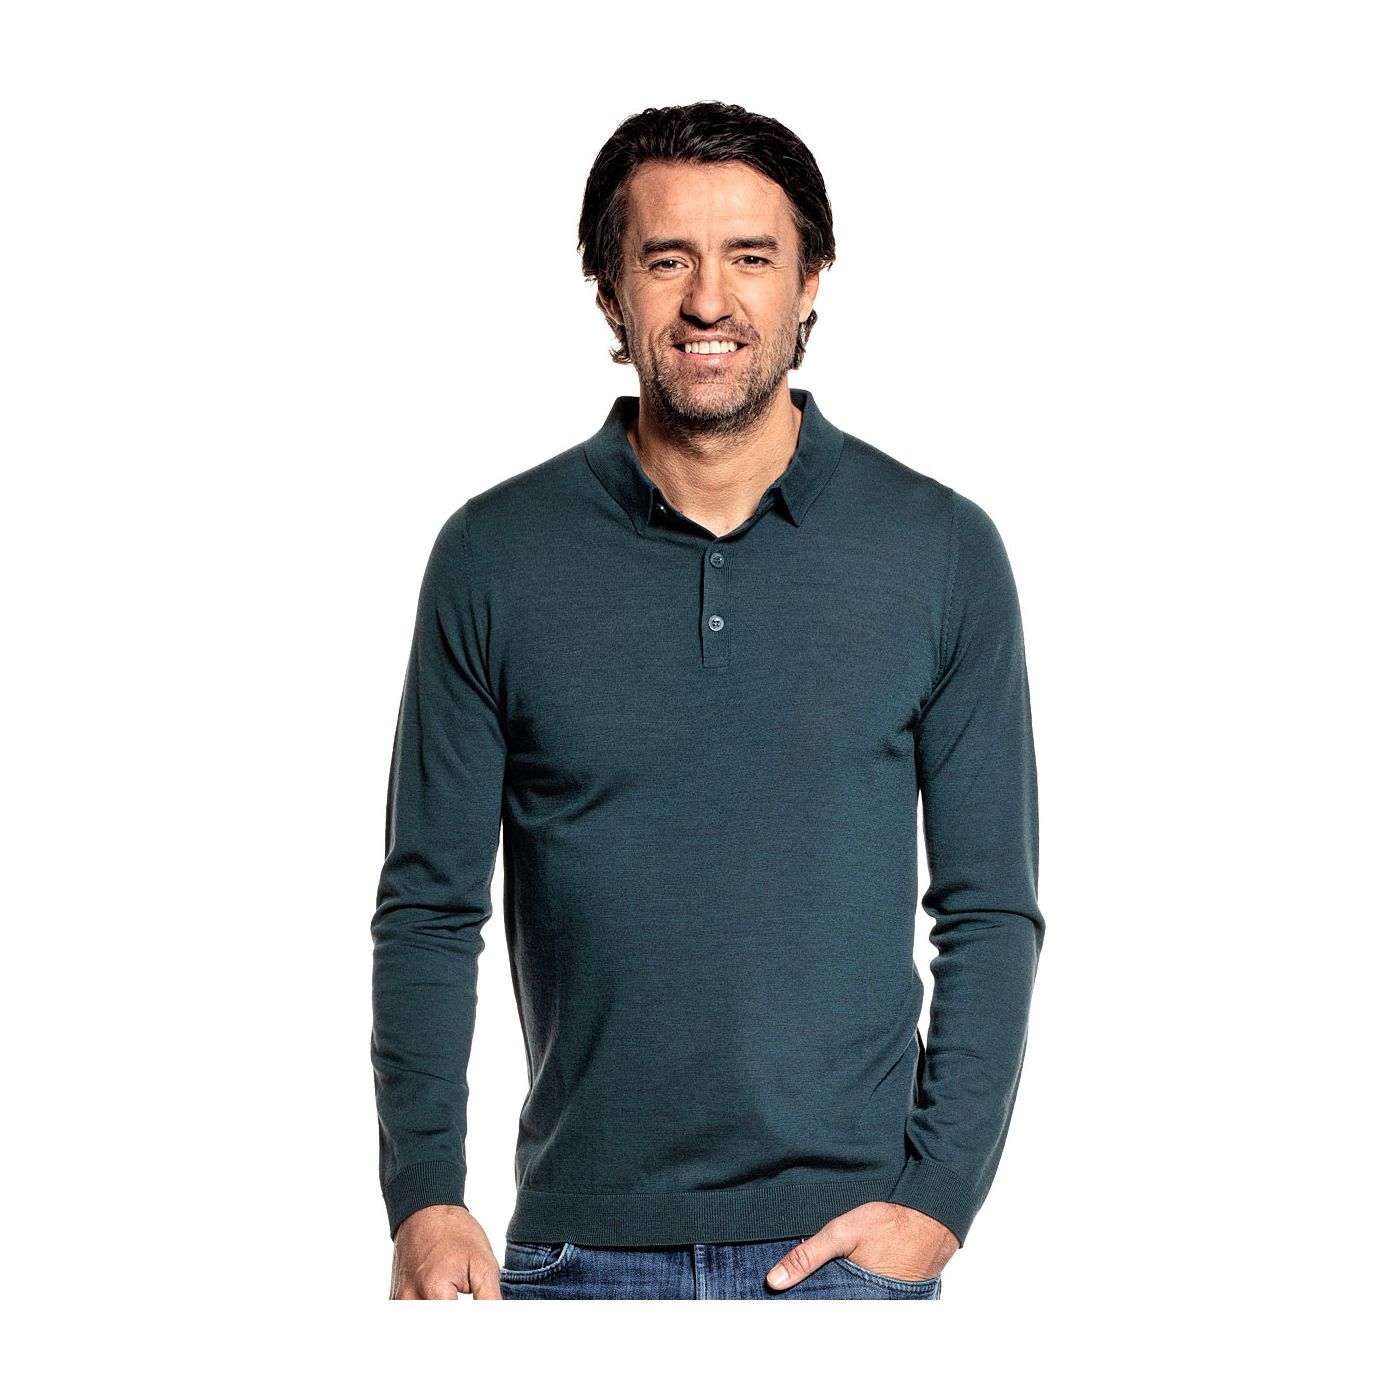 Polo long sleeve for men made of Merino wool in Blue green